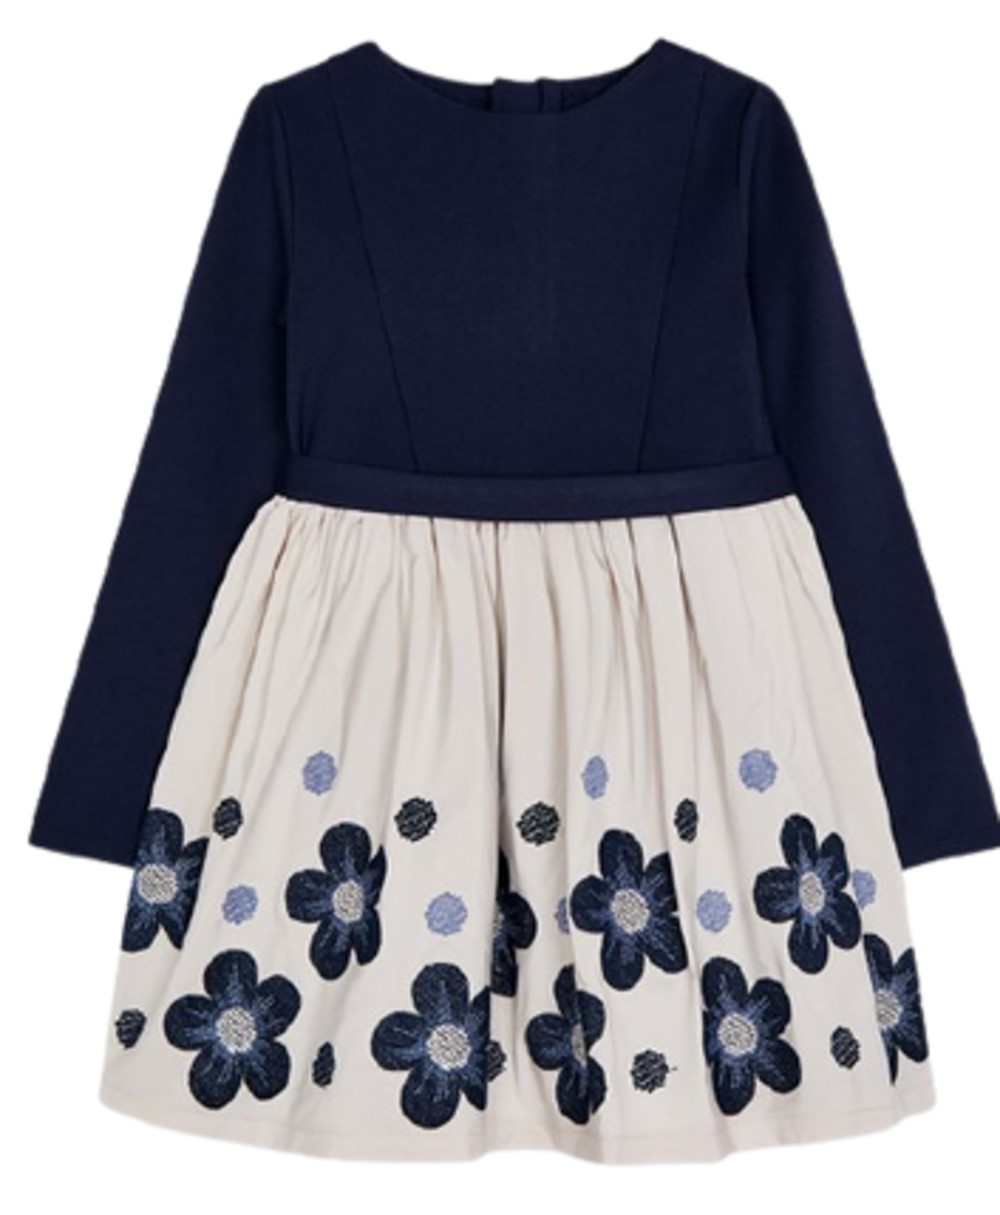 MAYORAL 4916 GIRLS NAVY AND CHAMPAGNE EMBROIDERED FLORAL DRESS